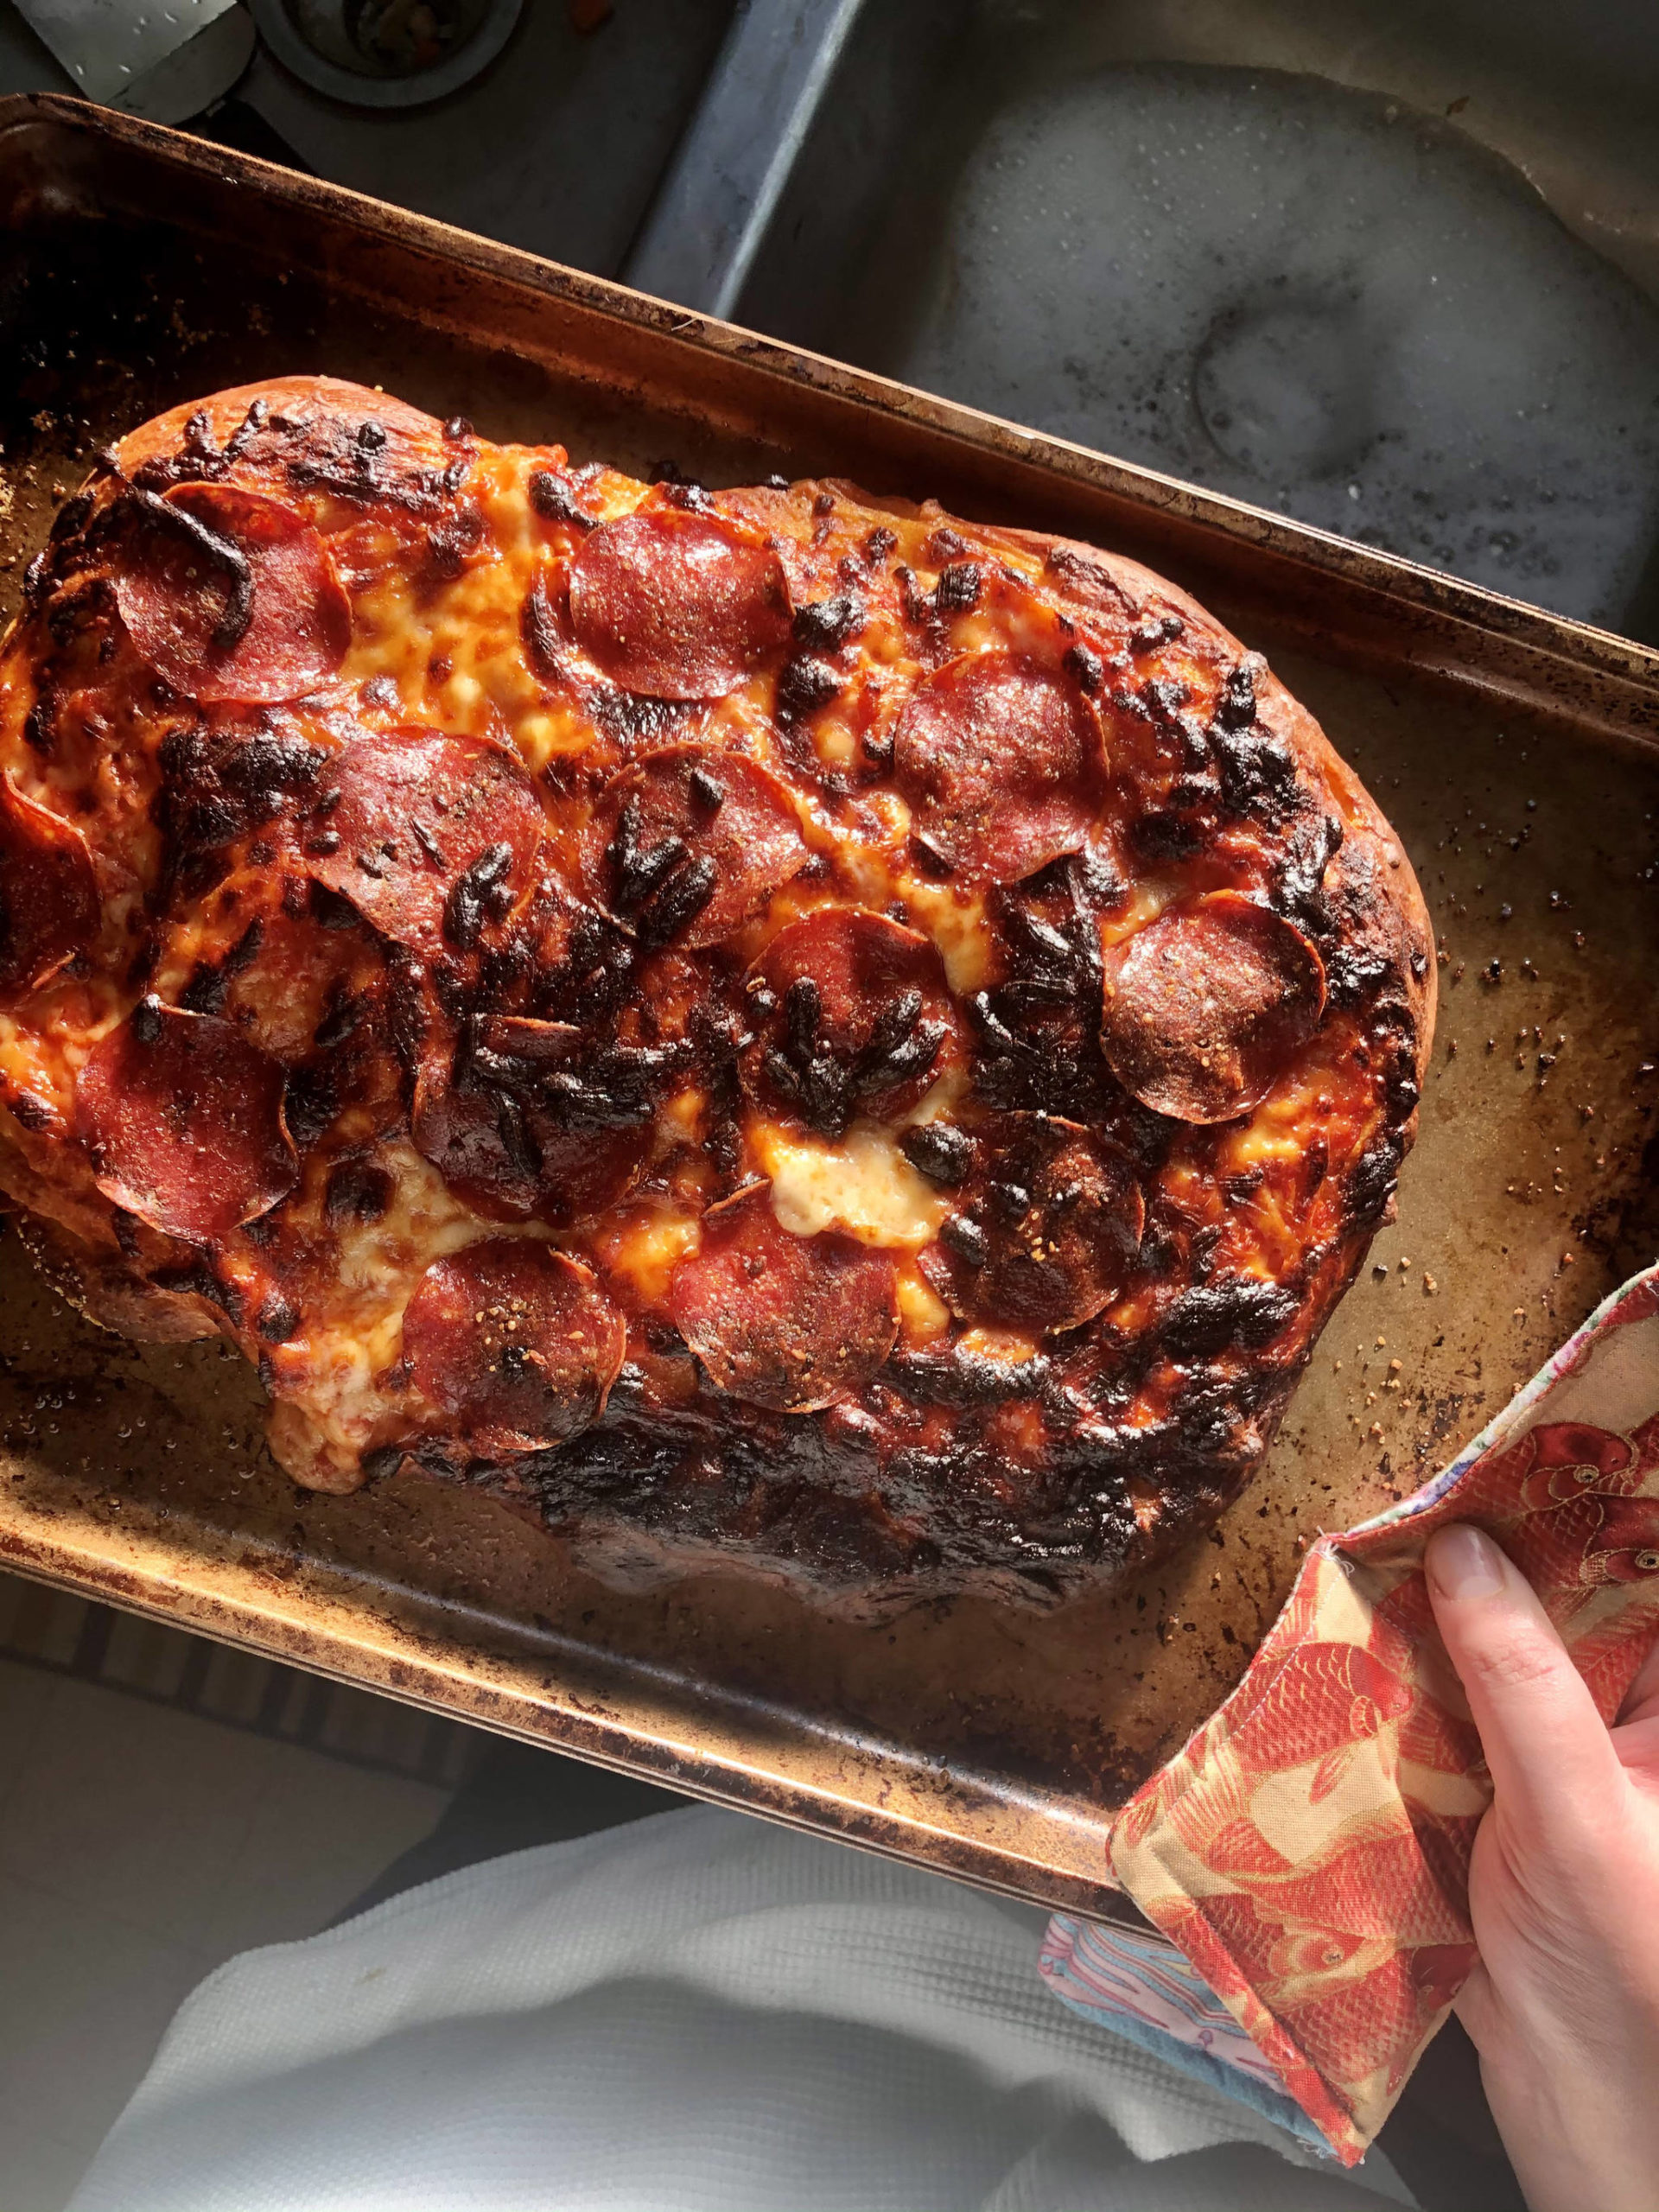 A little bit burnt, but this pizza turned out great, on Monday, Nov. 2, 2020, in Anchorage, Alaska. (Photo by Victoria Petersen/Peninsula Clarion).